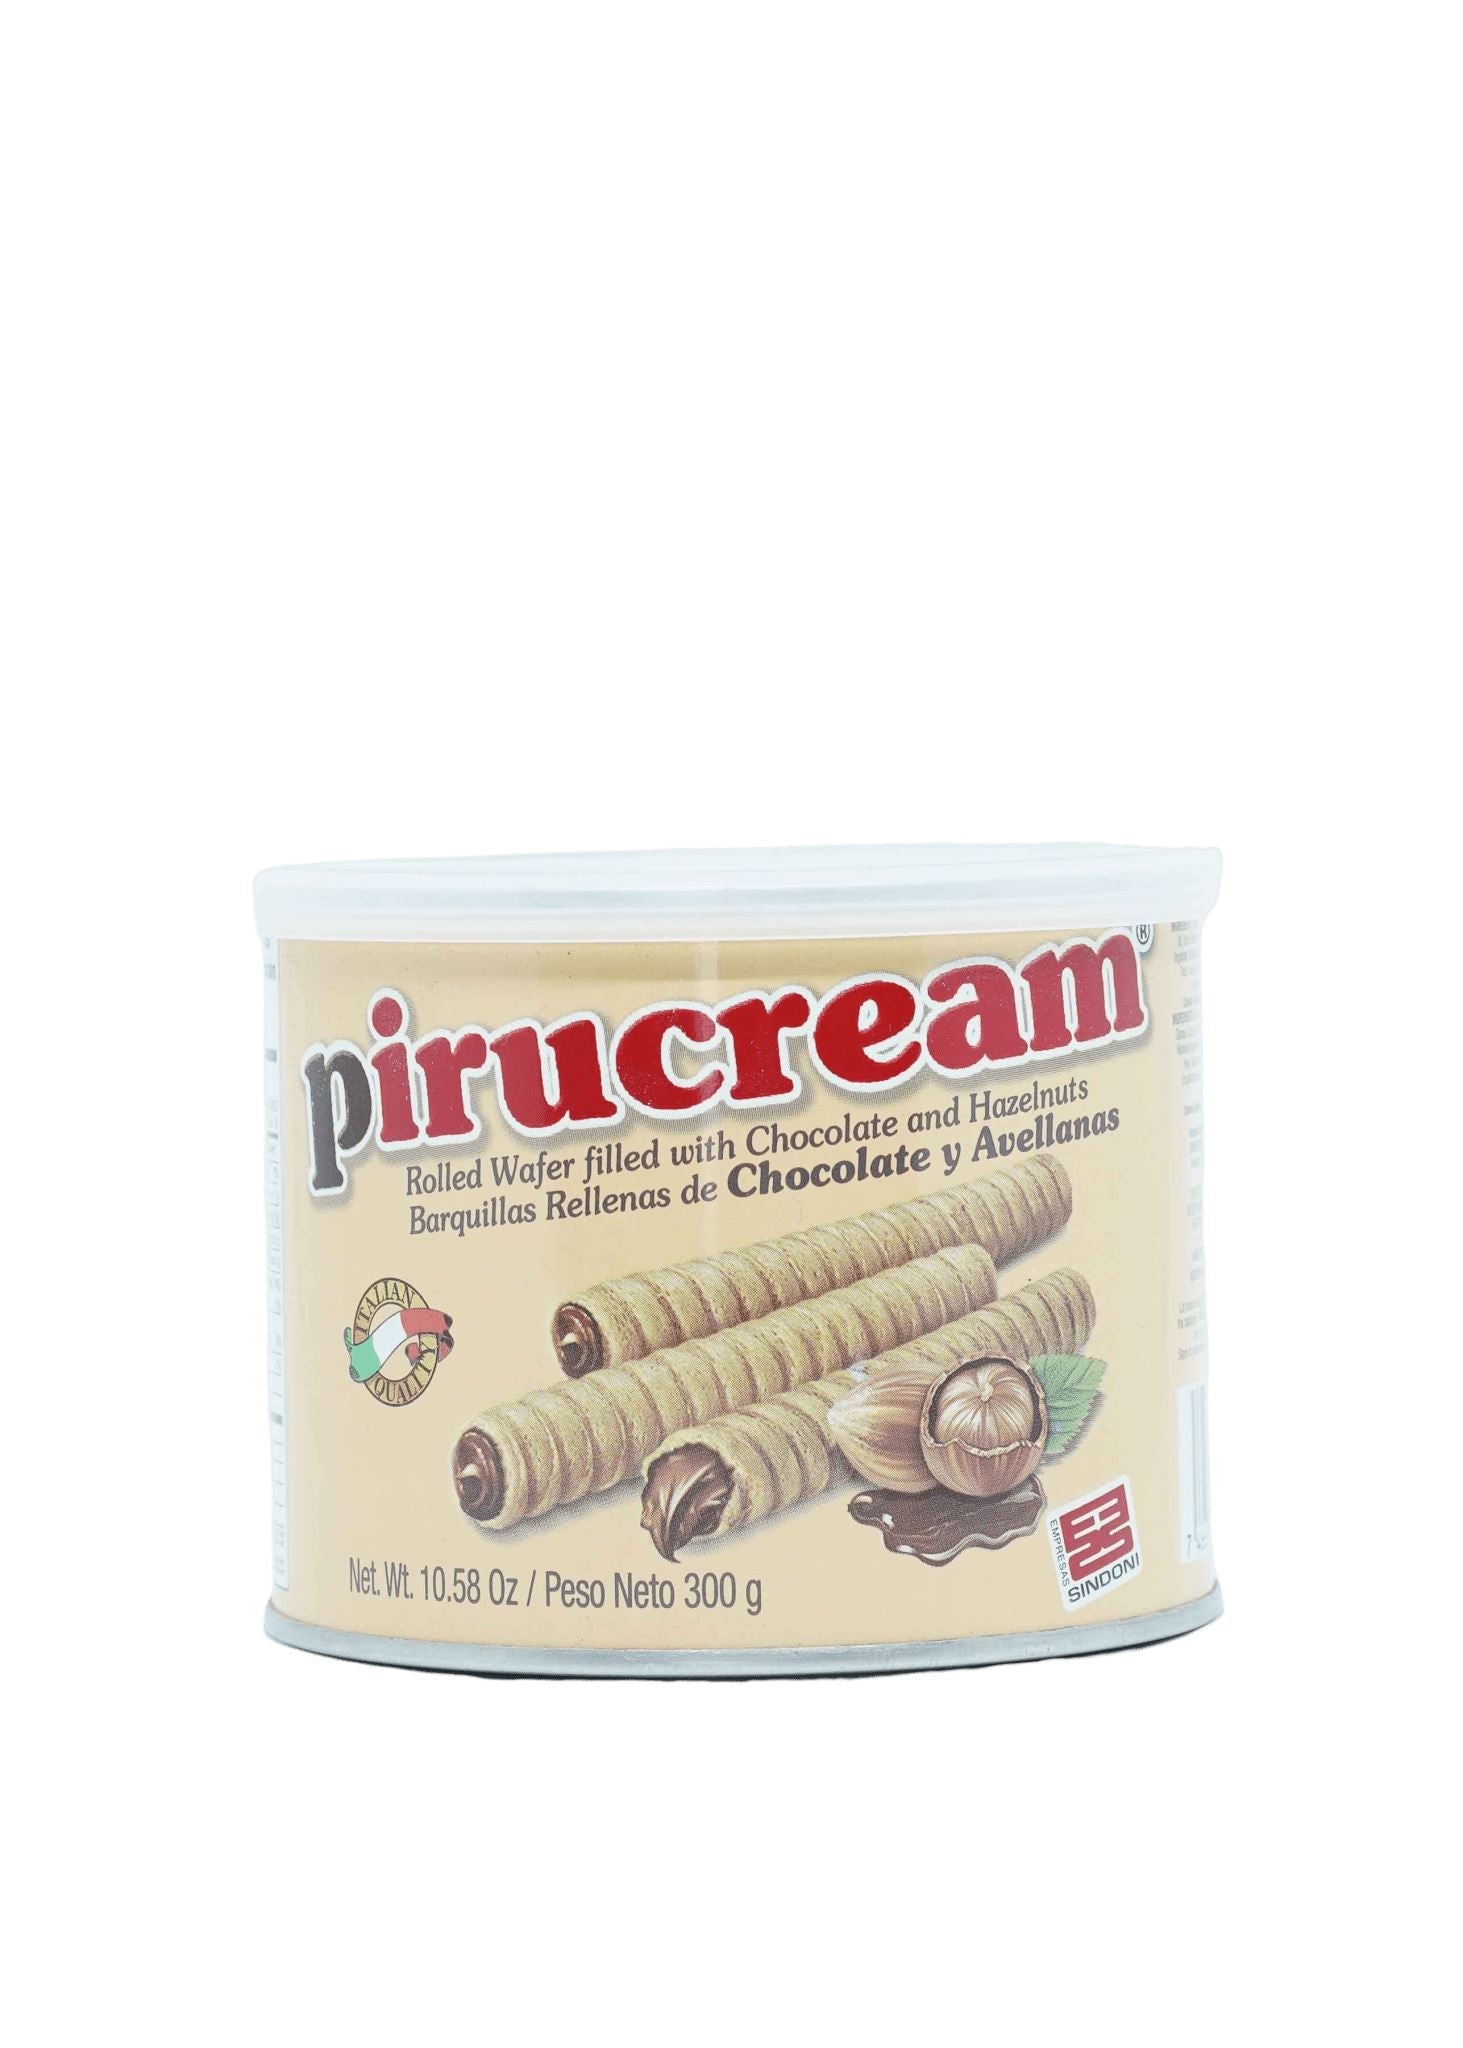 Pirucream Rolled Wafer 155g / 300g Miscellaneous Sindoni Group 